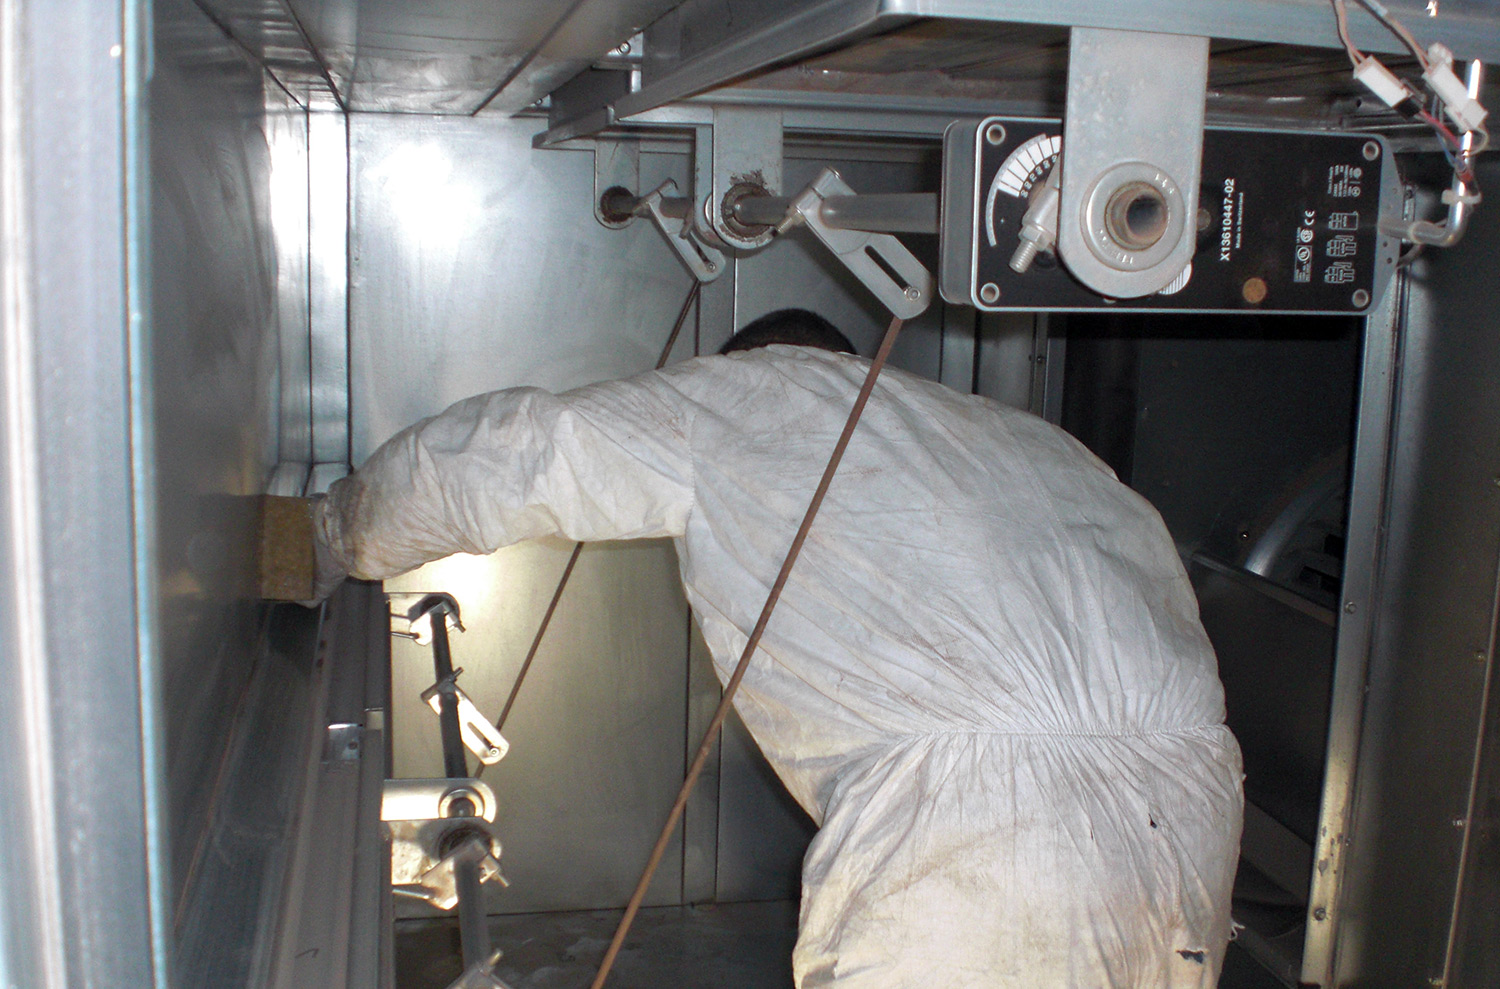 Commercial ductwork cleaning in progress by TERS Environmental Restoration experts